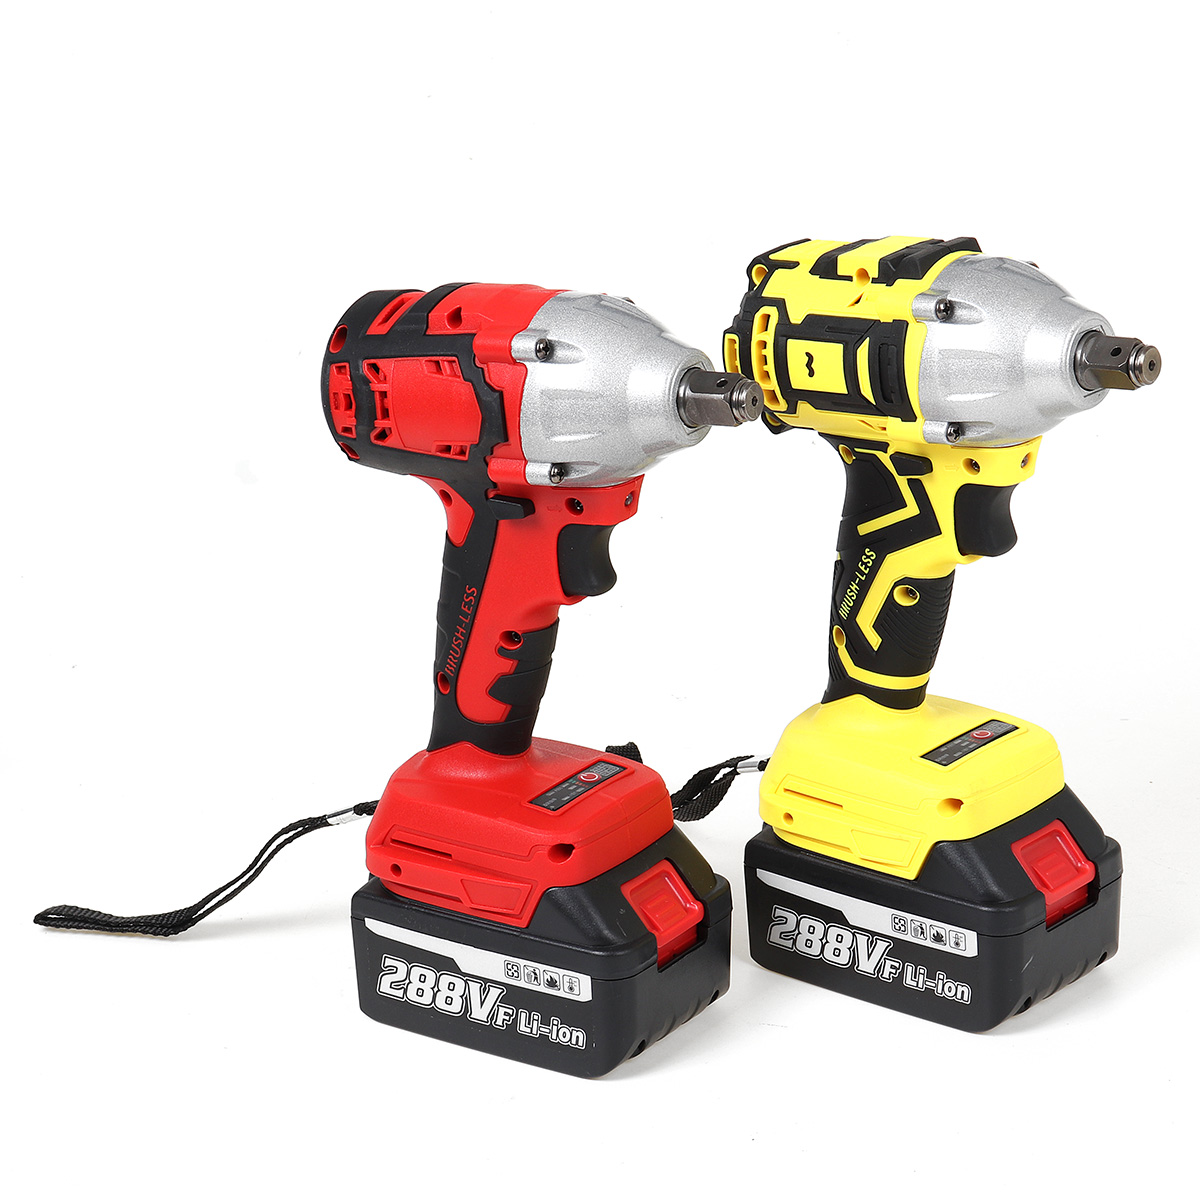 288VF-Adjustable-Speed-Brushless-Wrench-Cordless-Li-ion-Battery-Electrc-Wrench--With-LED-Light-1689704-6